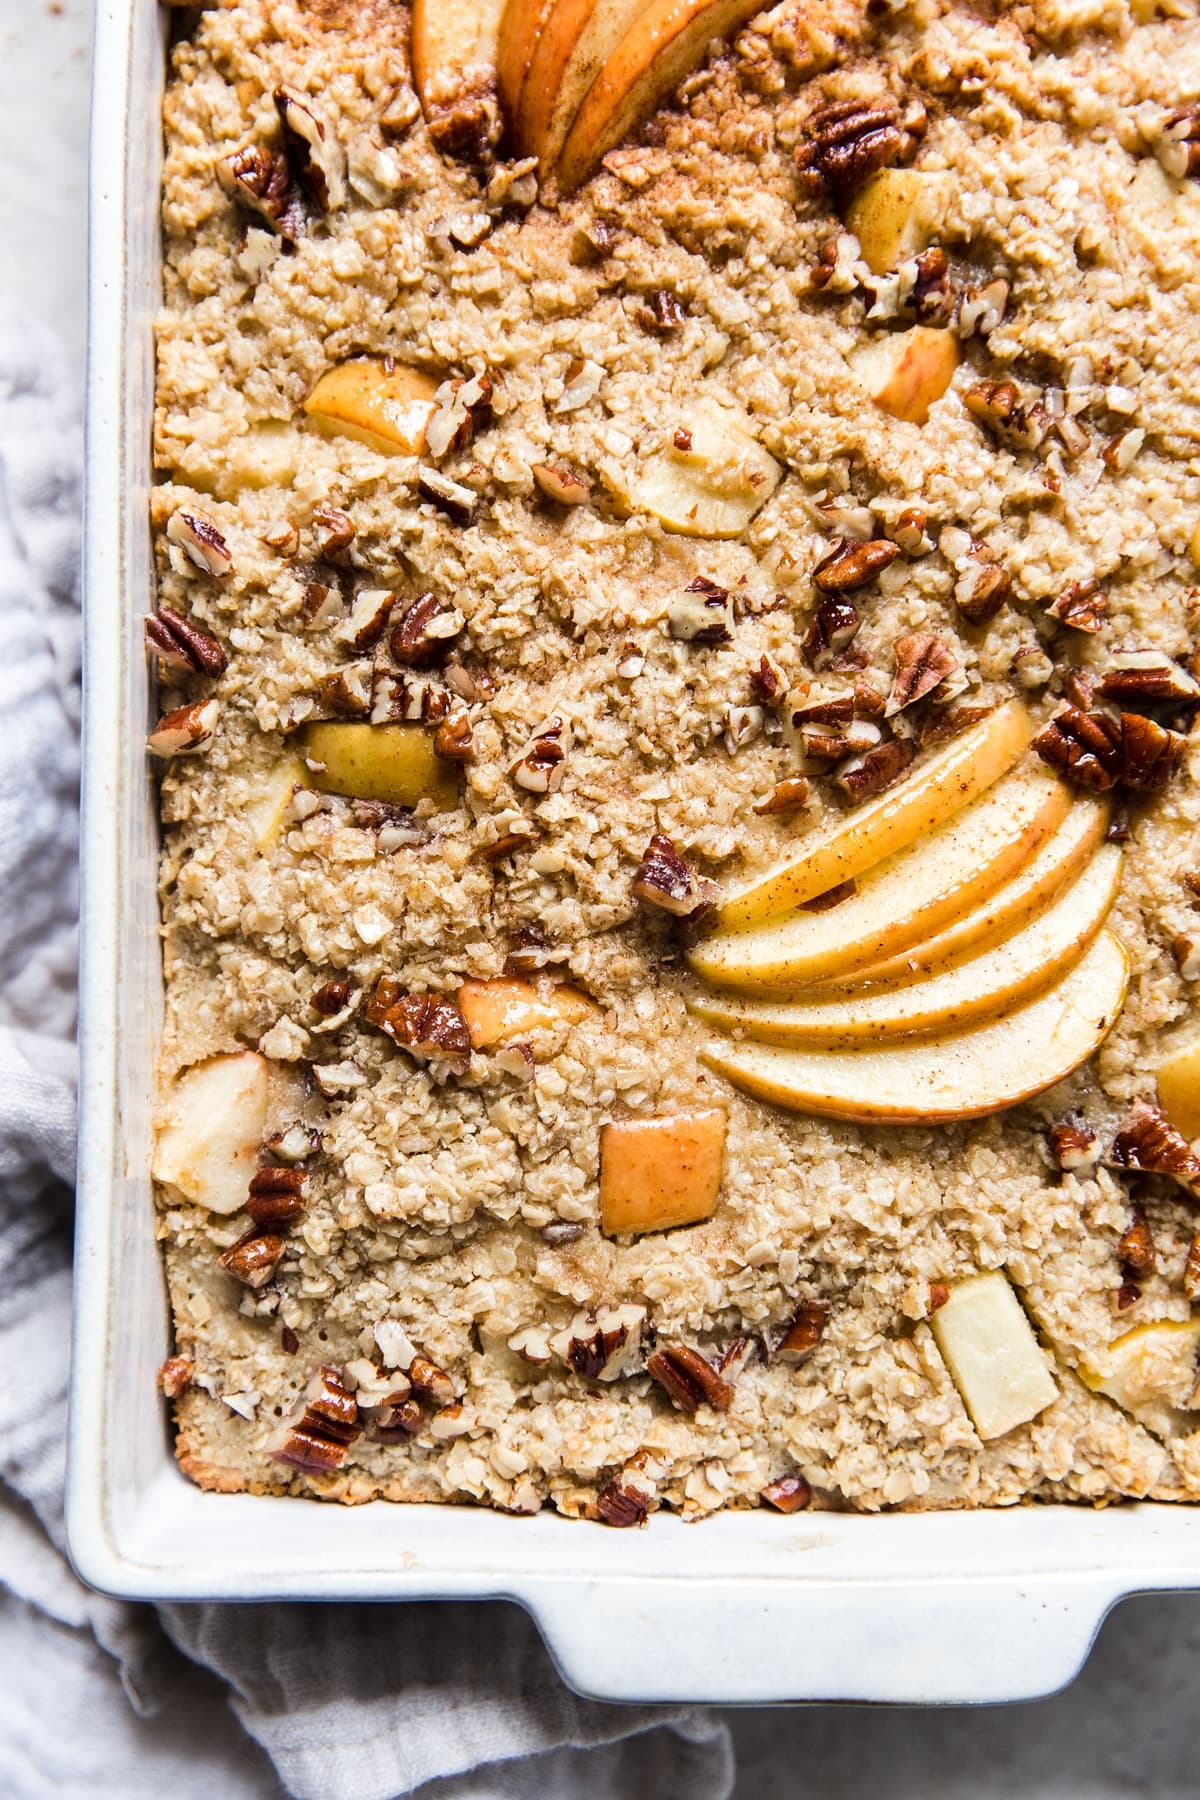 Baked Oatmeal With Apples, pecans and maple syrup